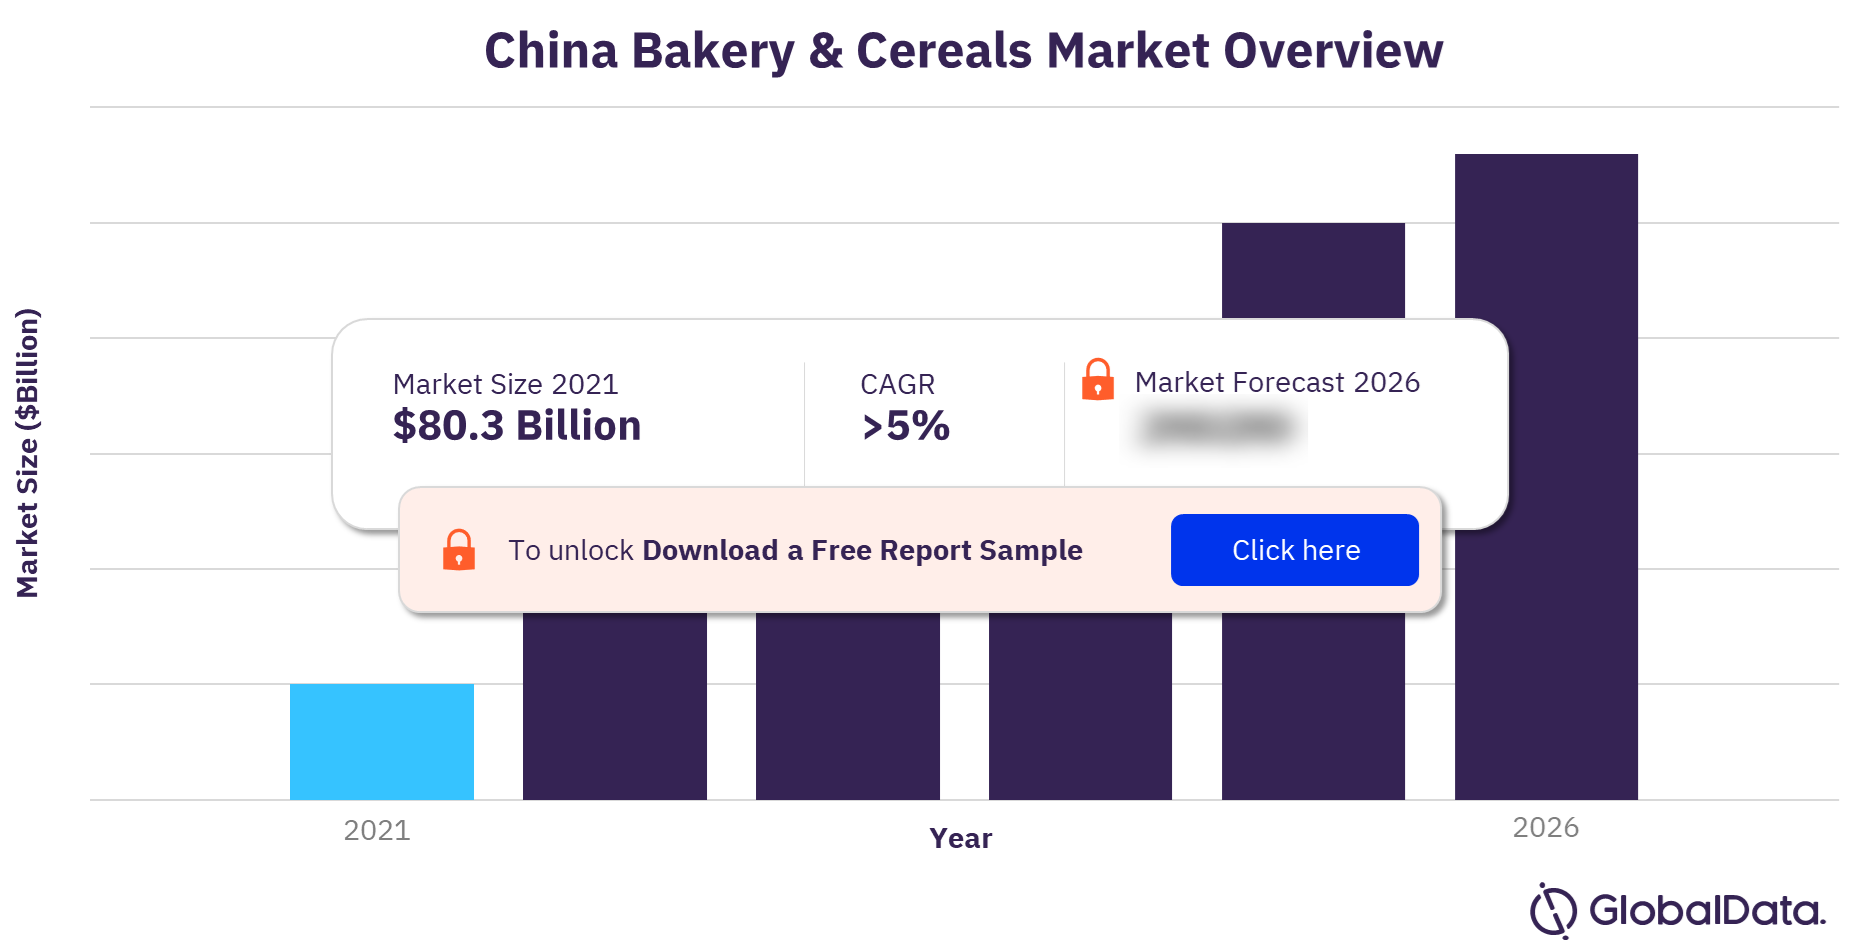 China Bakery & Cereals Market Outlook